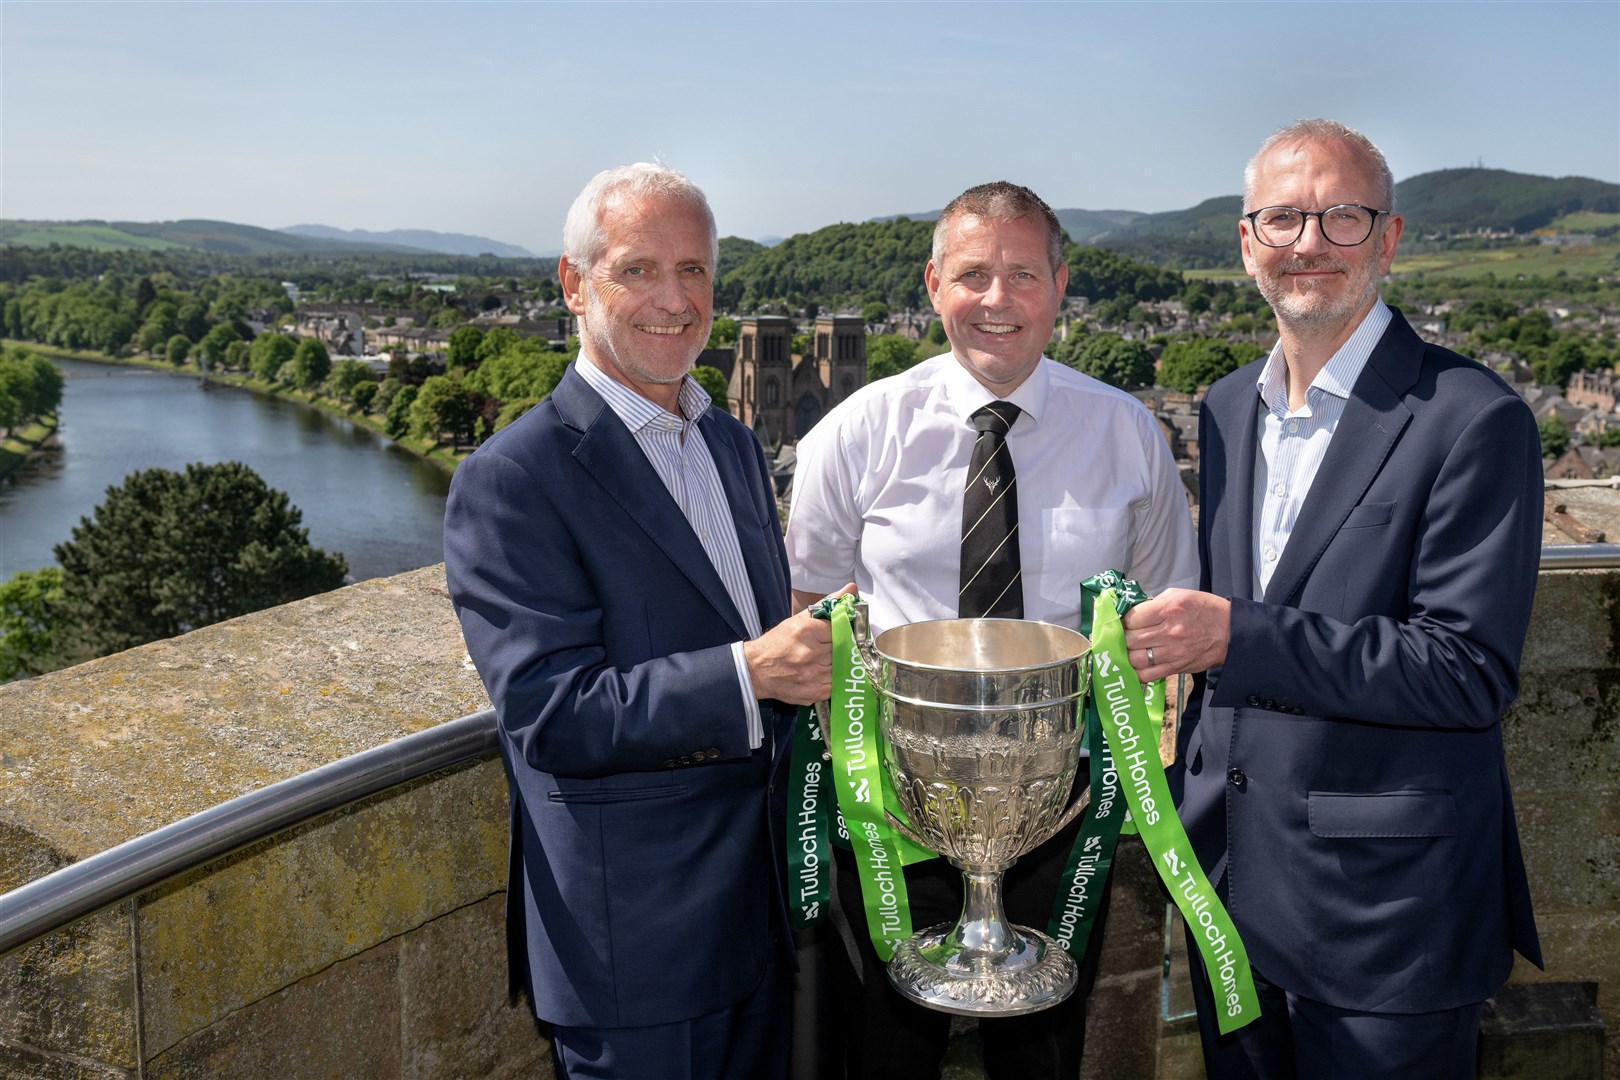 Tulloch Homes Managing Director Sandy Grant; Camanachd Association President Steven MacKenzie & Springfield Properties CEO Innes Smith with the Camanachd Cup atop Inverness Castle, overlooking Bught Park where the 2023 final will take place.